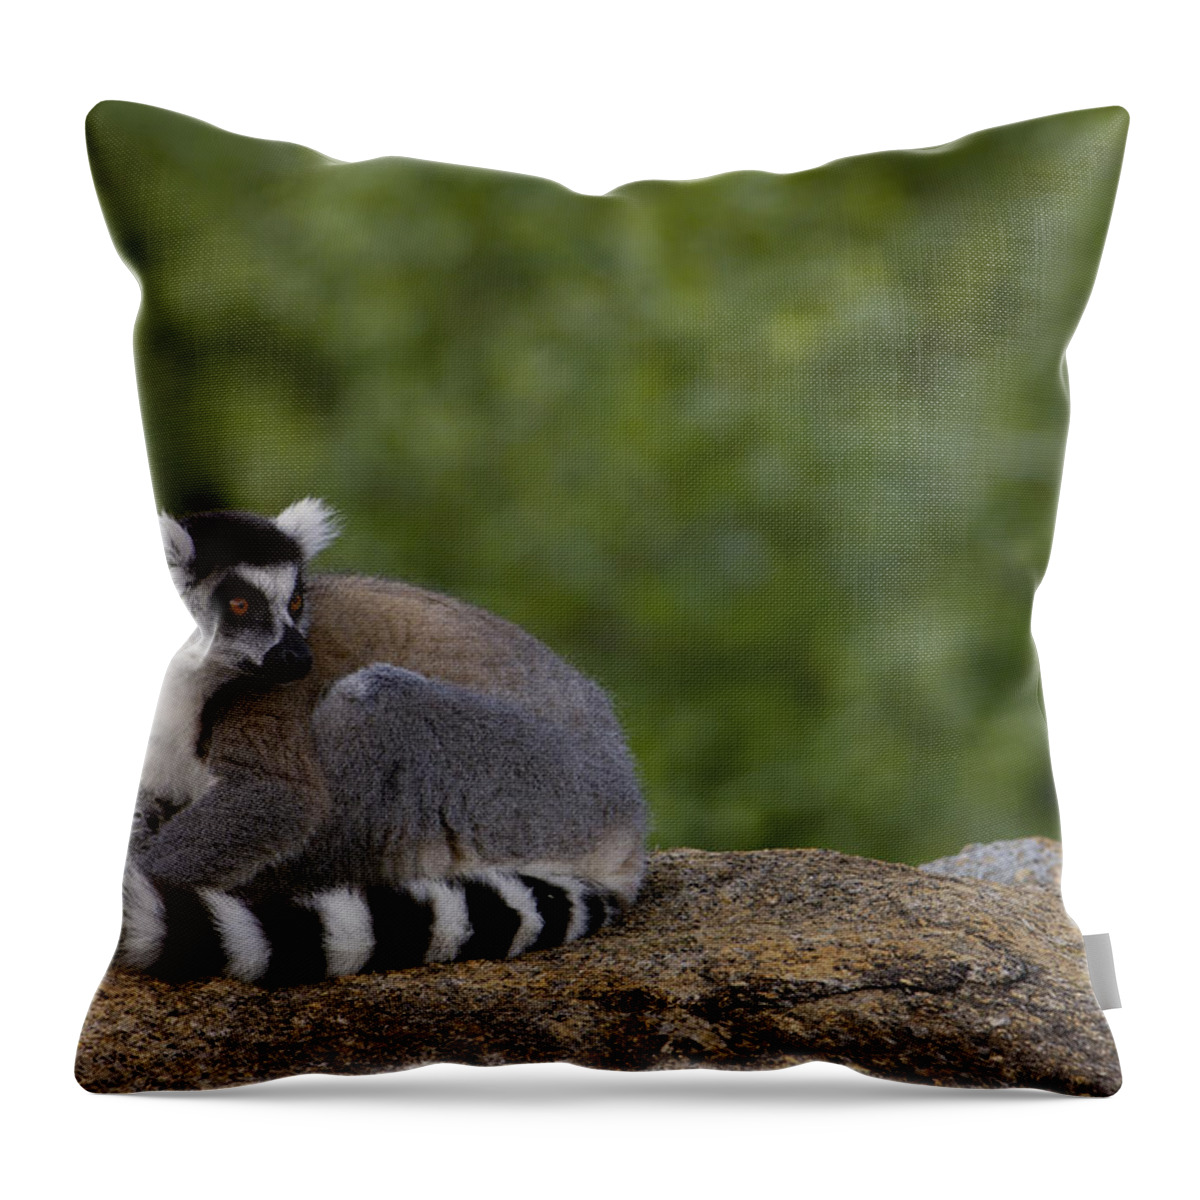 Feb0514 Throw Pillow featuring the photograph Ring-tailed Lemur Resting On Rocks by Pete Oxford